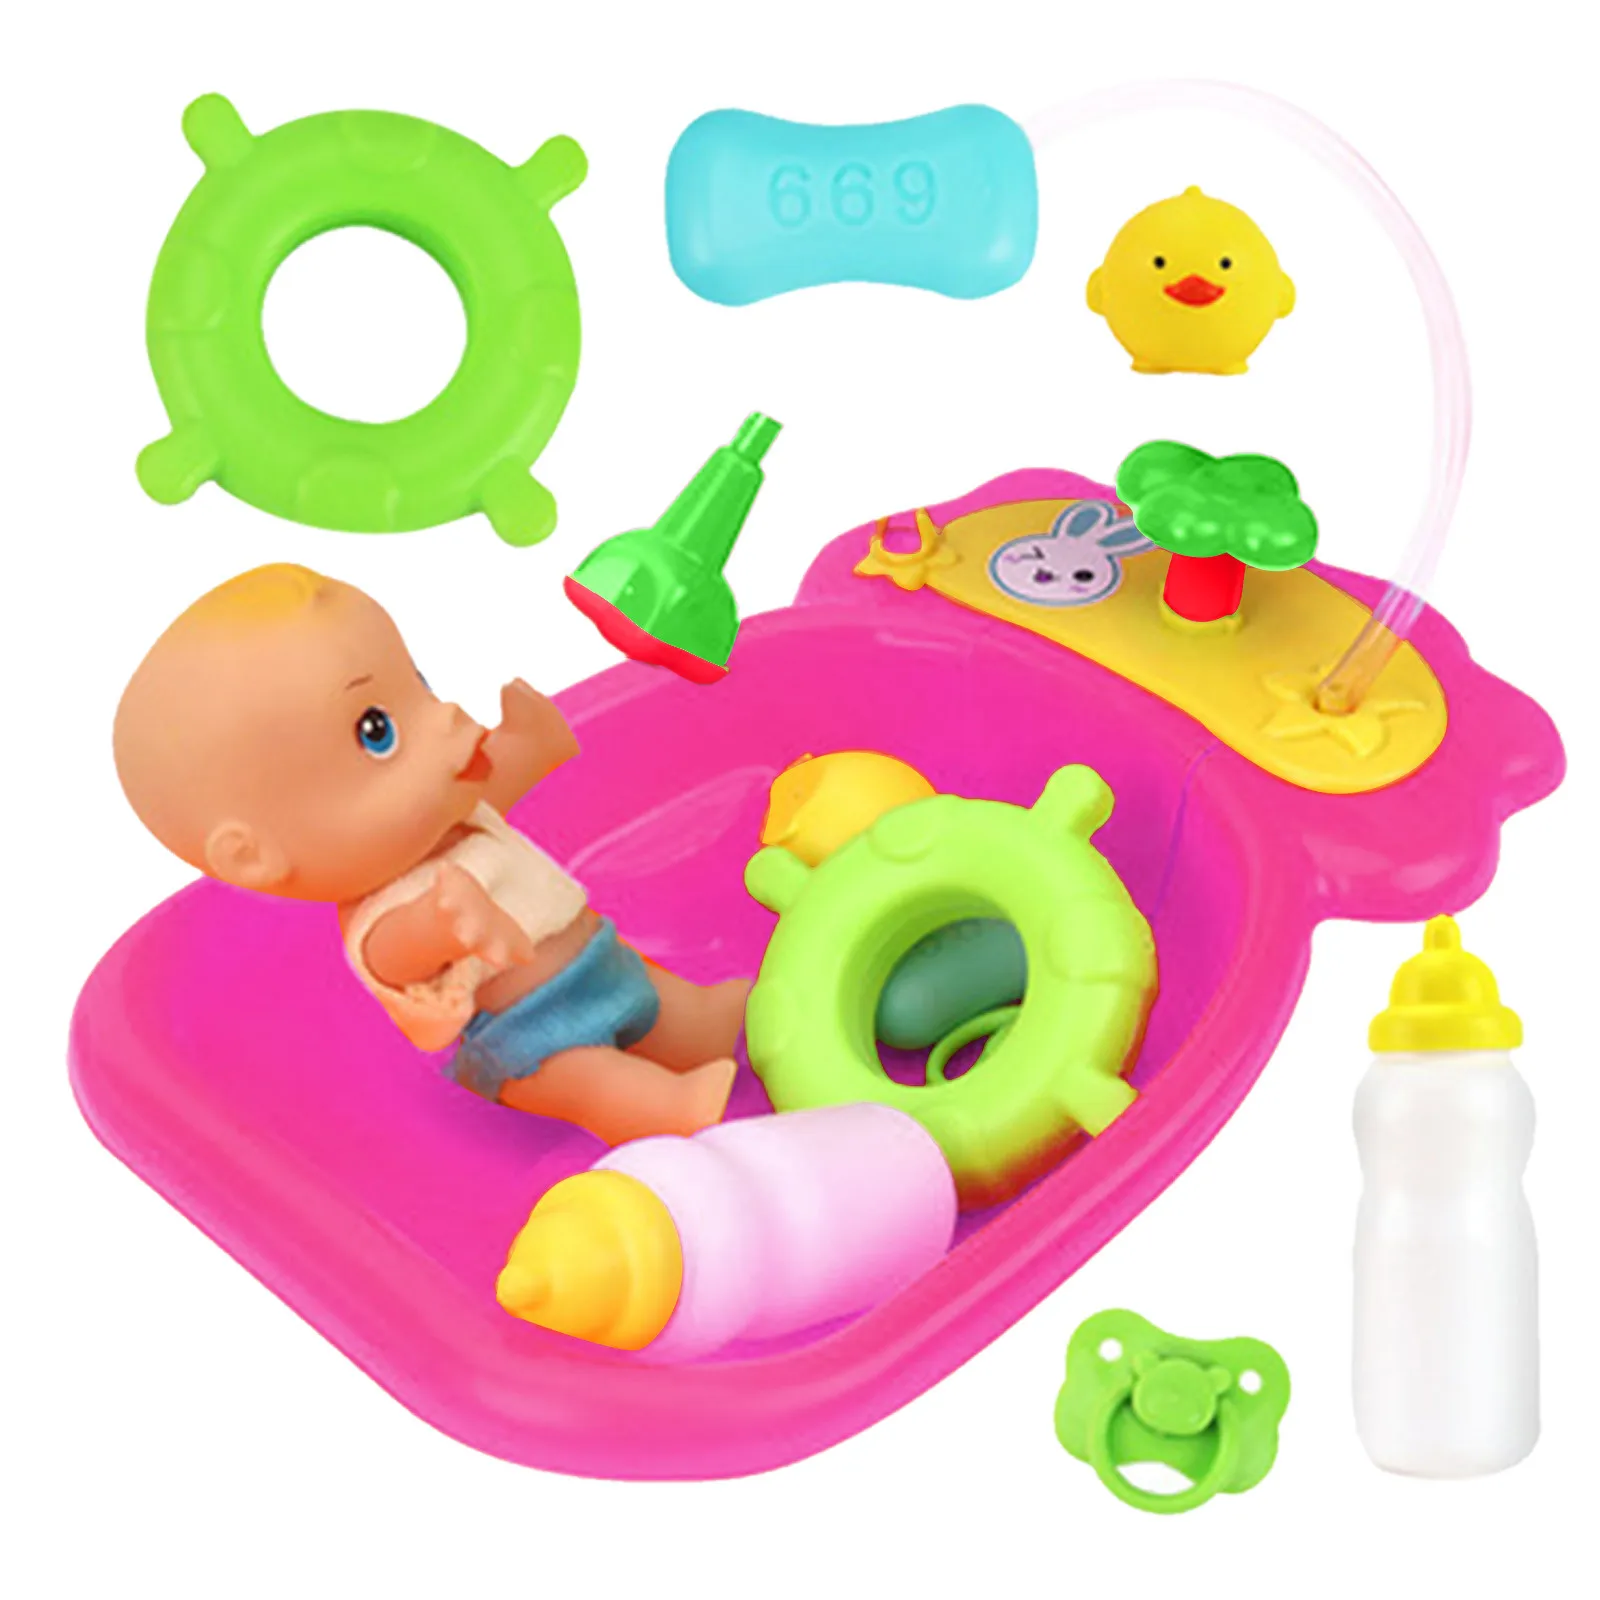 kids-plastic-bath-tub-doll-set-pretend-role-play-toy-with-shower-accessories-baby-girl-bath-doll-kids-with-toy-accessories